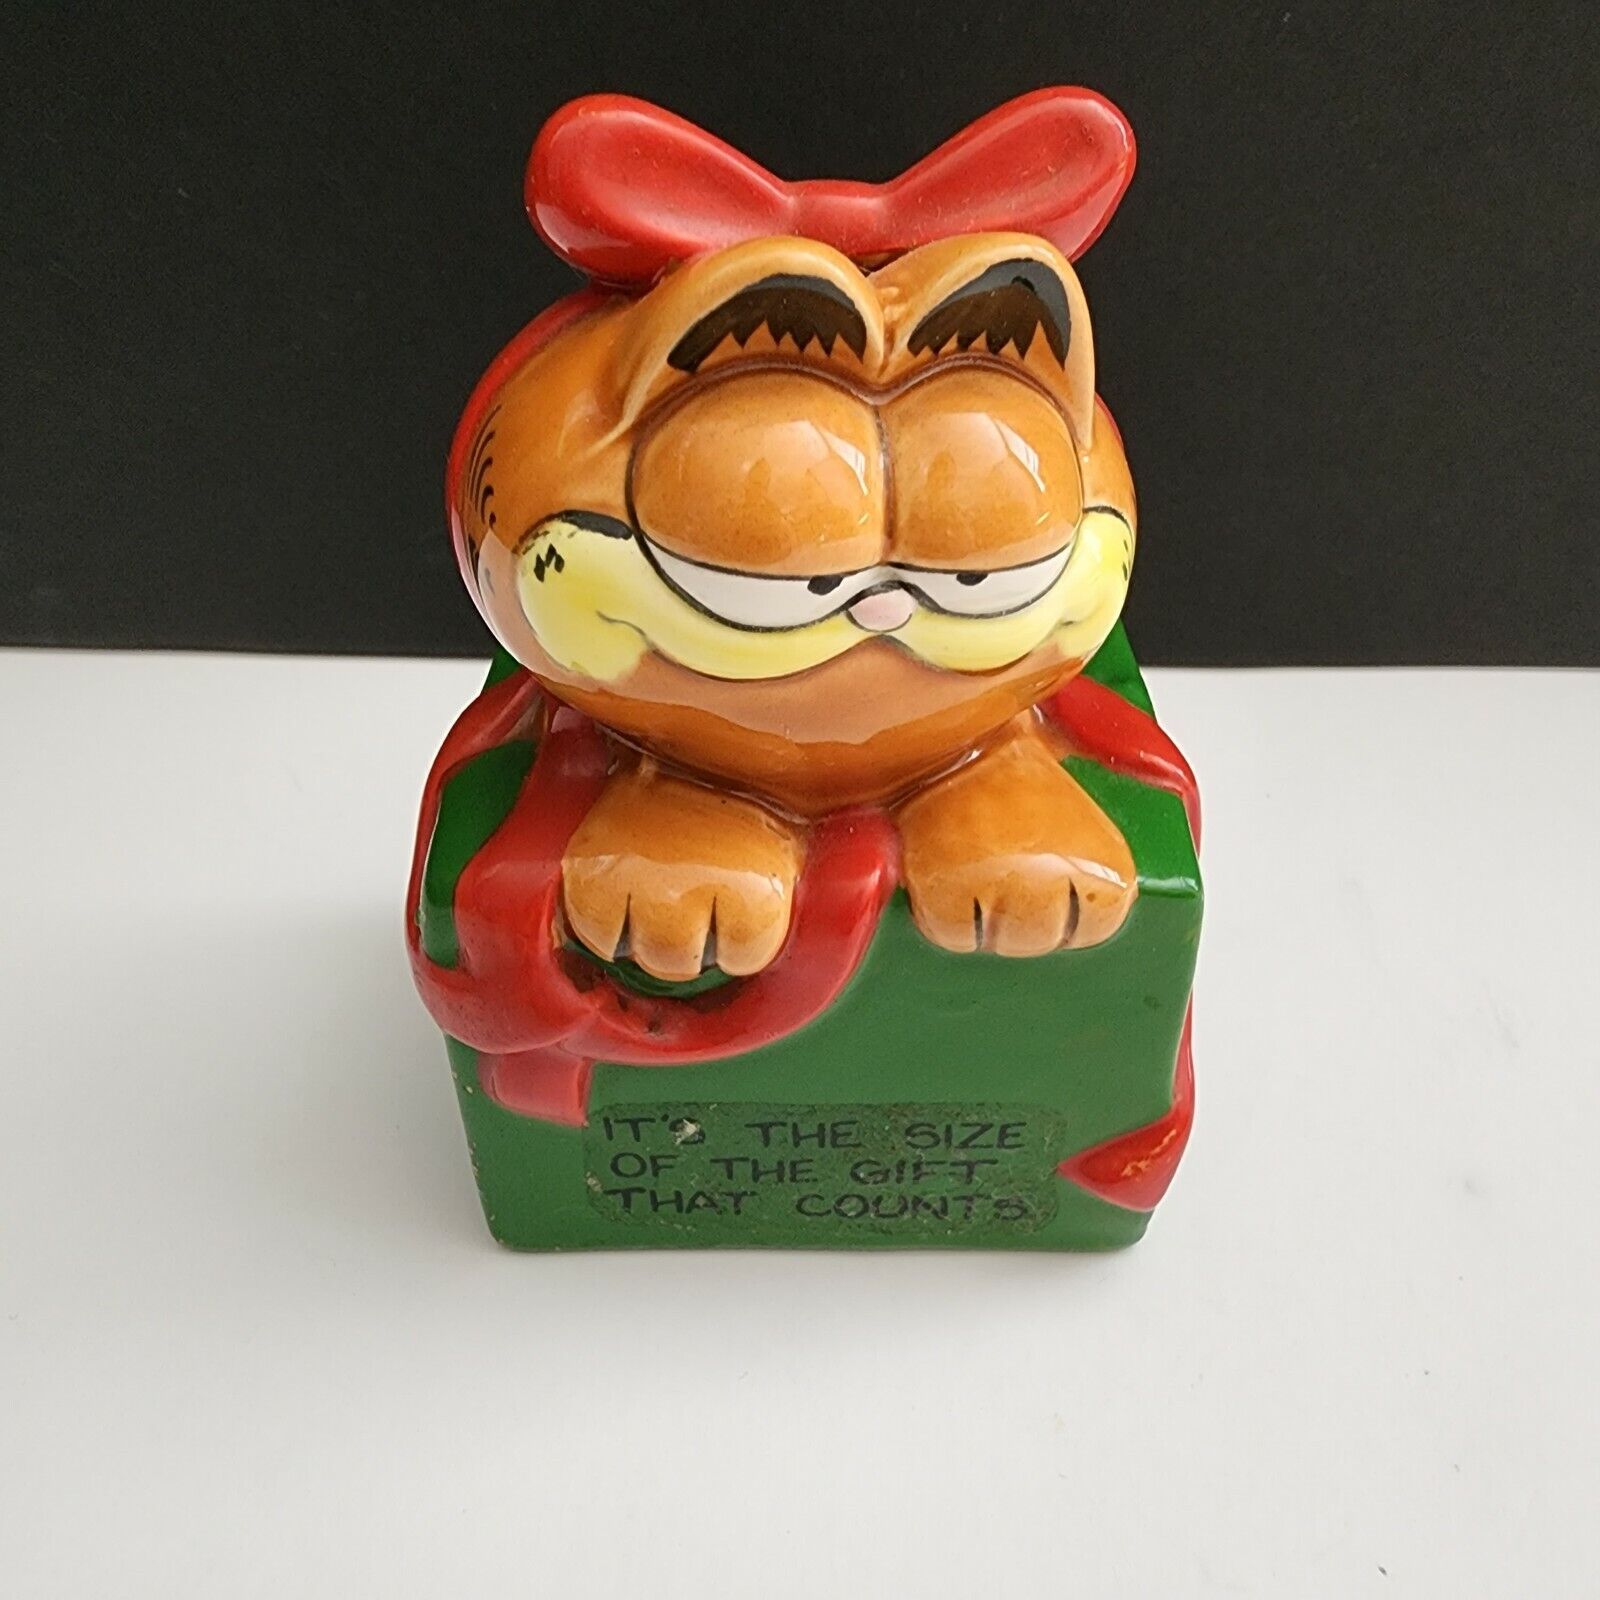 Enesco Garfield Cat ceramic Figure Christmas 1981 The size of the gift matters 